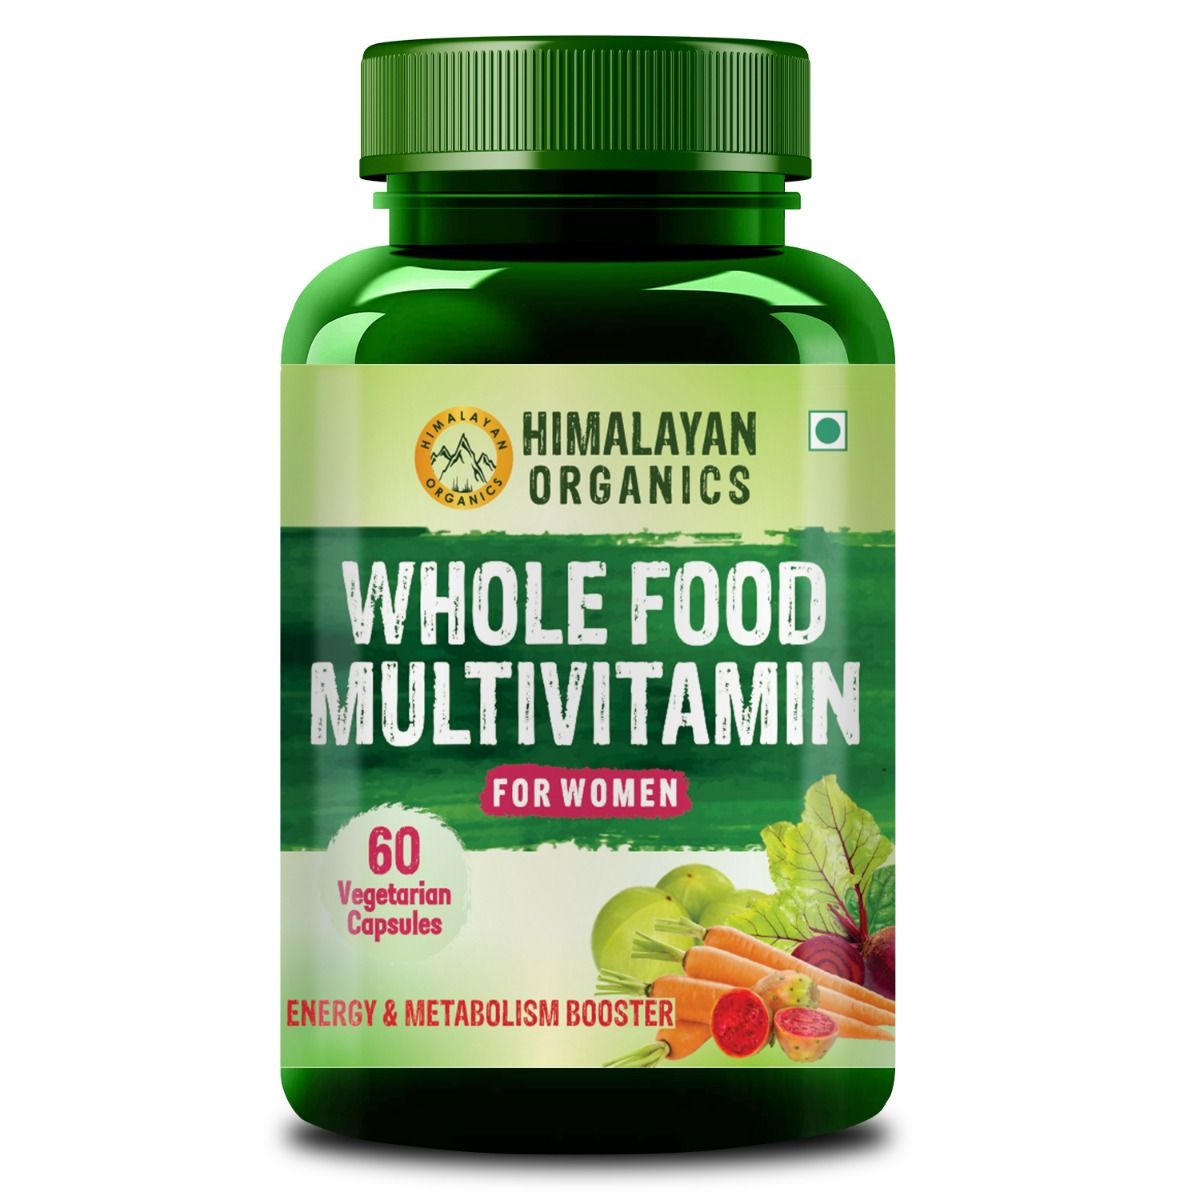 Himalayan Organics Whole Food Multivitamin for Women, 60 Capsules, Pack of 1 